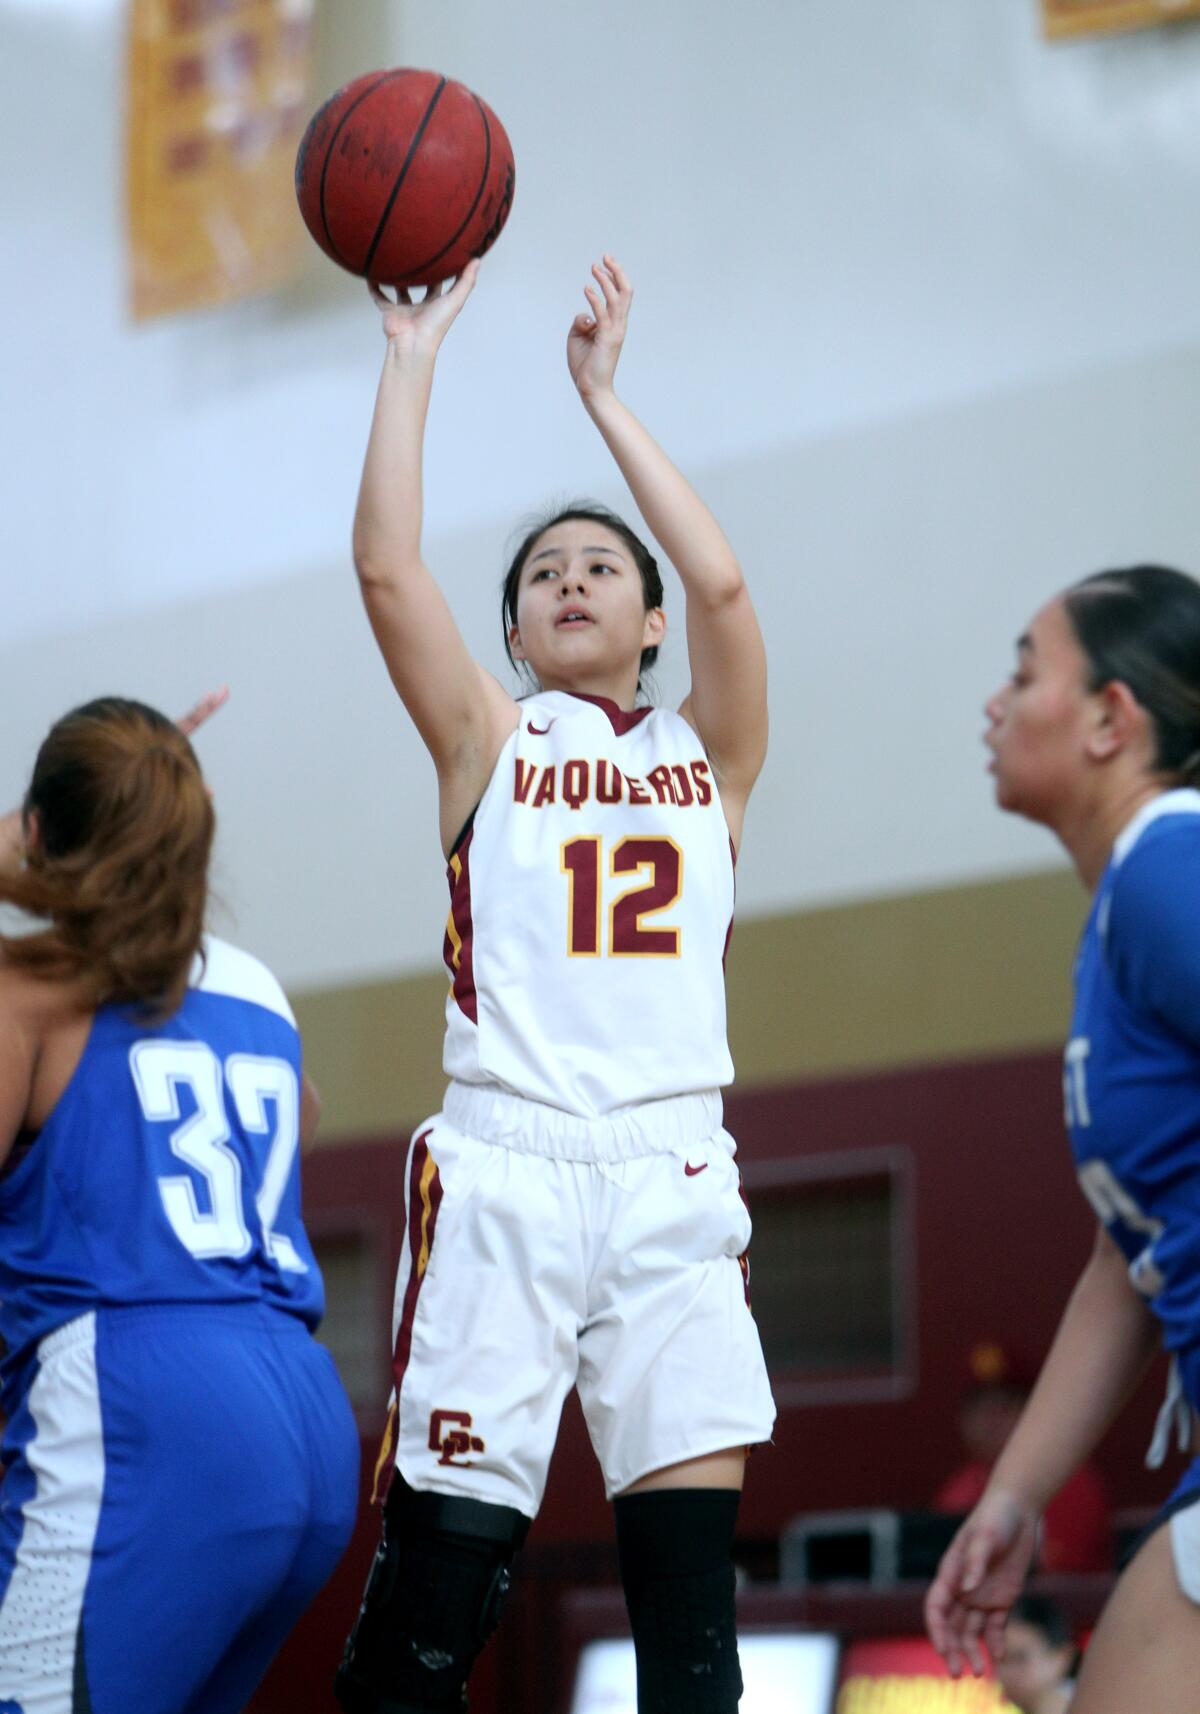 Glendale Community College basketball player Penelopi Trieu shoots in game vs. West Los Angeles College, at home in Glendale on Saturday, Feb. 1, 2020. GCC won it's 21st consecutive game 78-55.